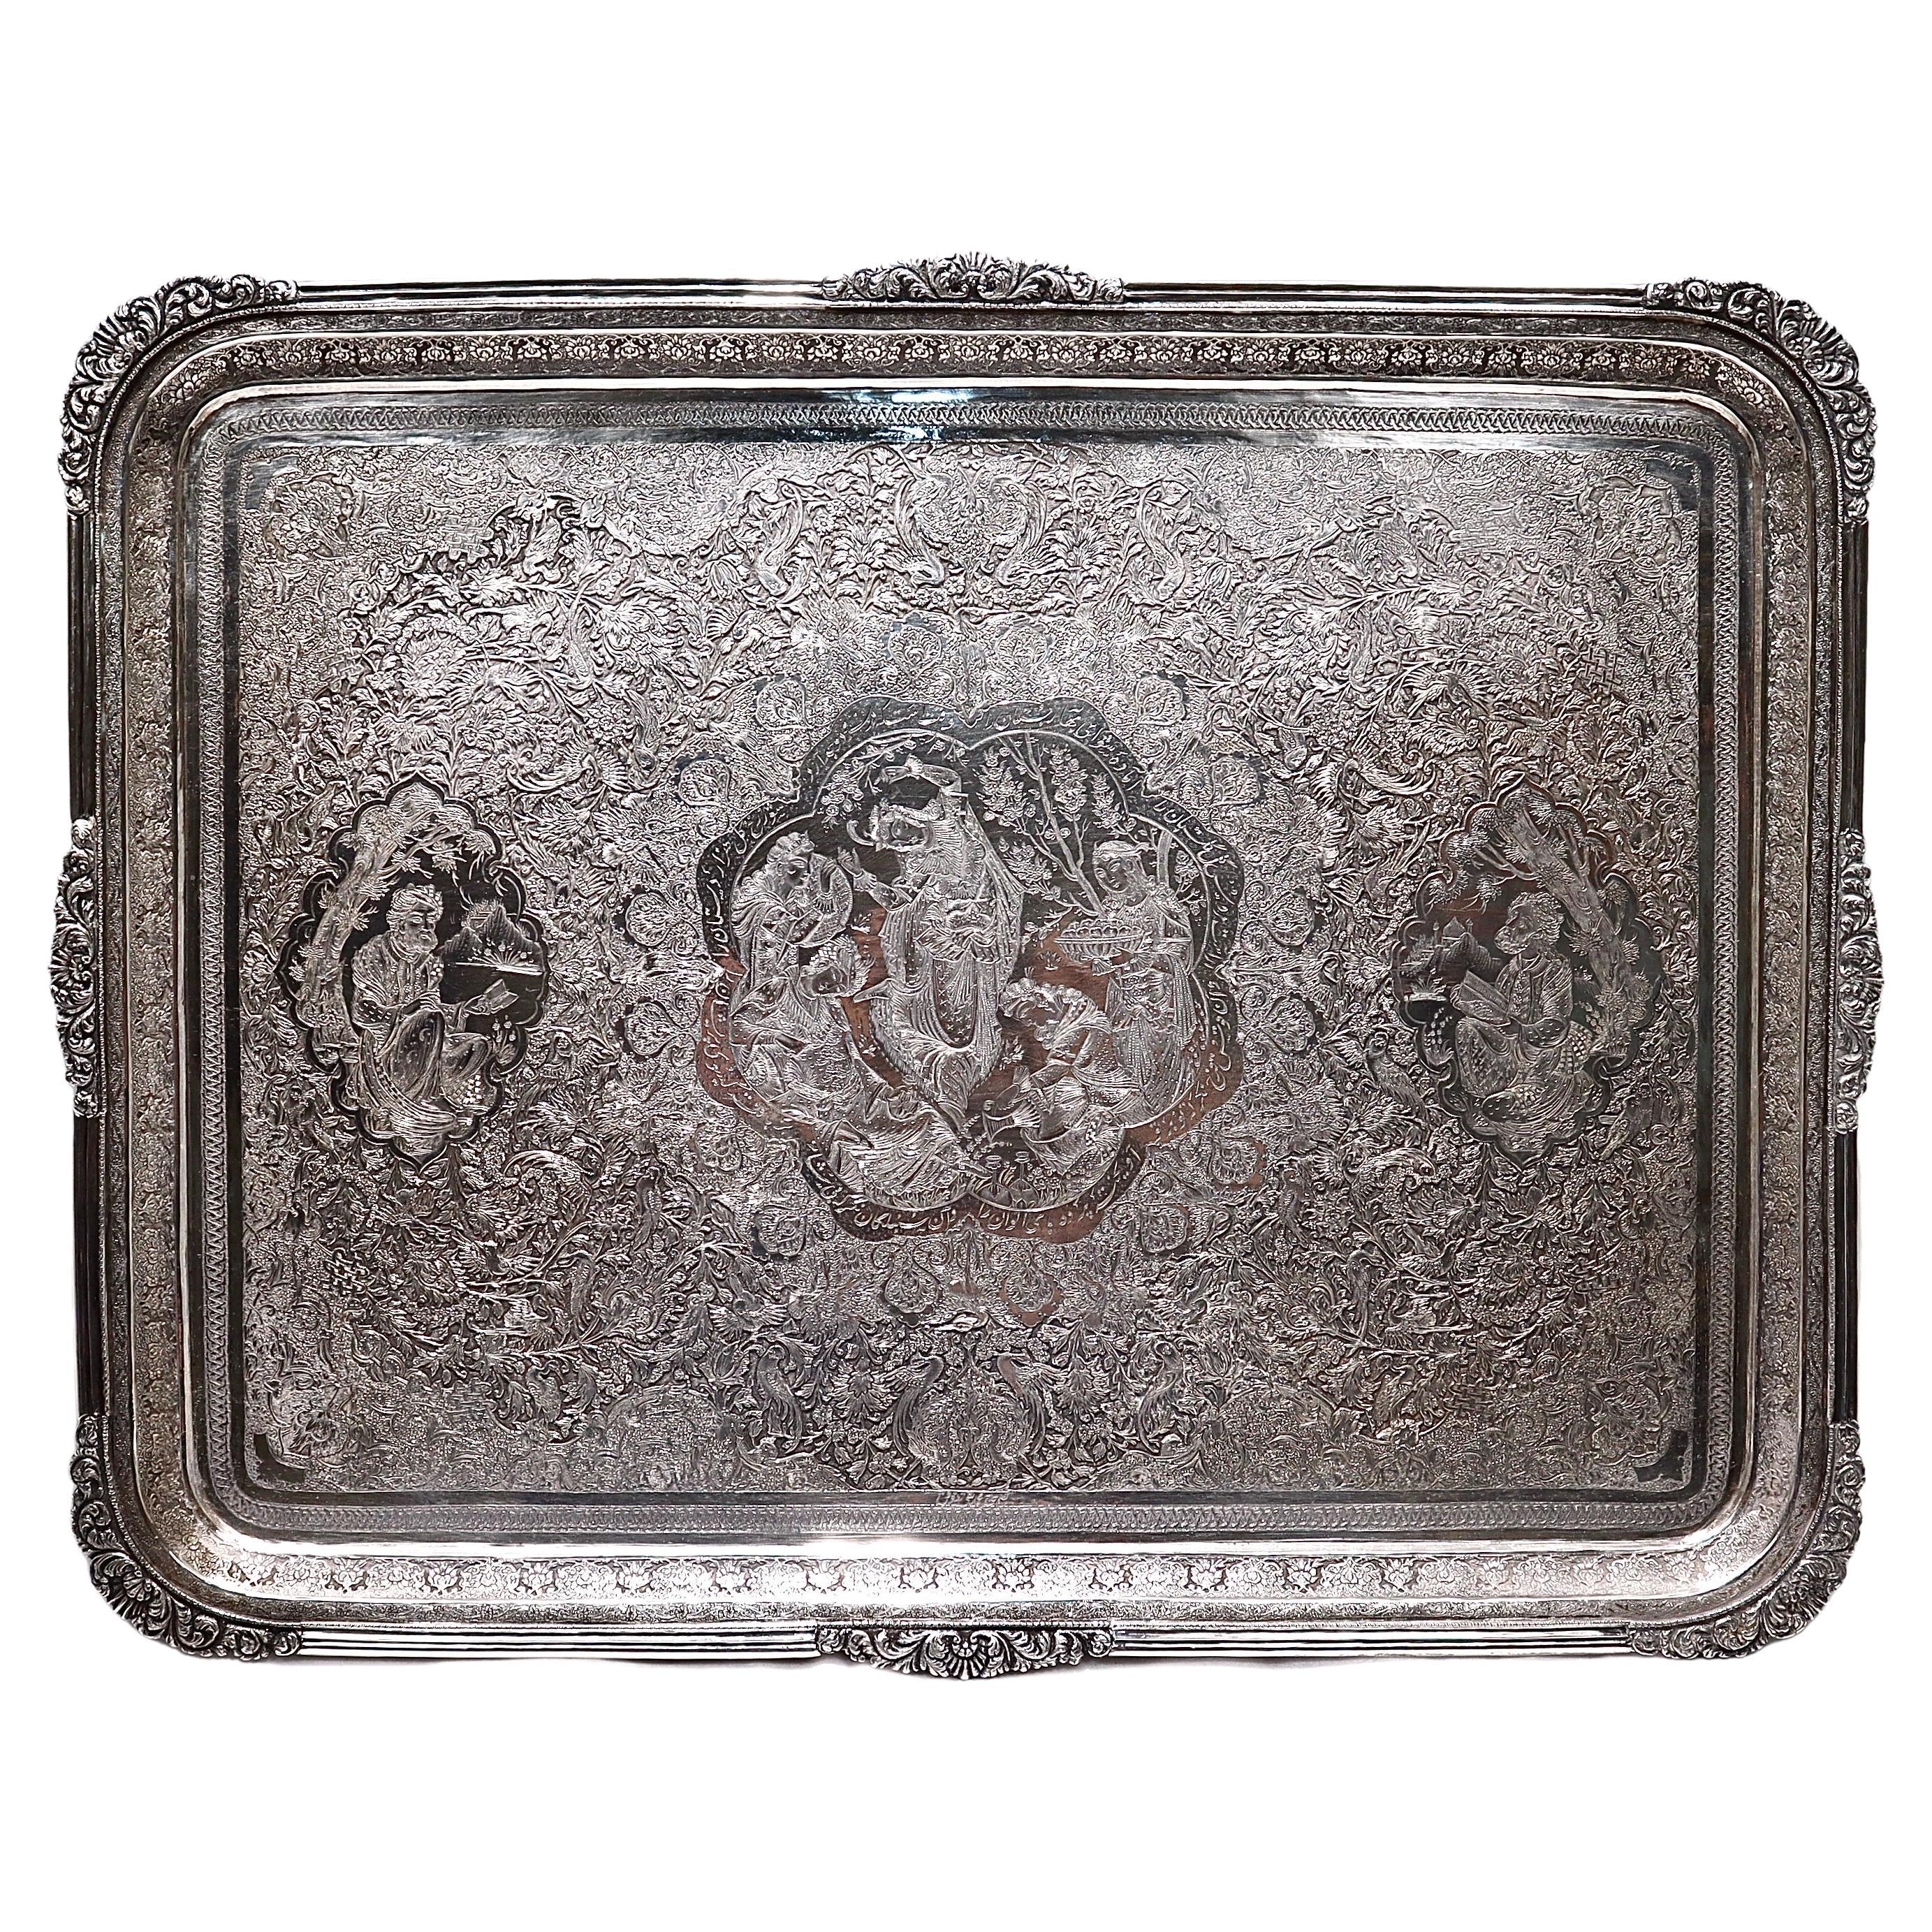 Old or Antique Signed Islamic Ottoman or Persian Incised Silver Serving Tray For Sale